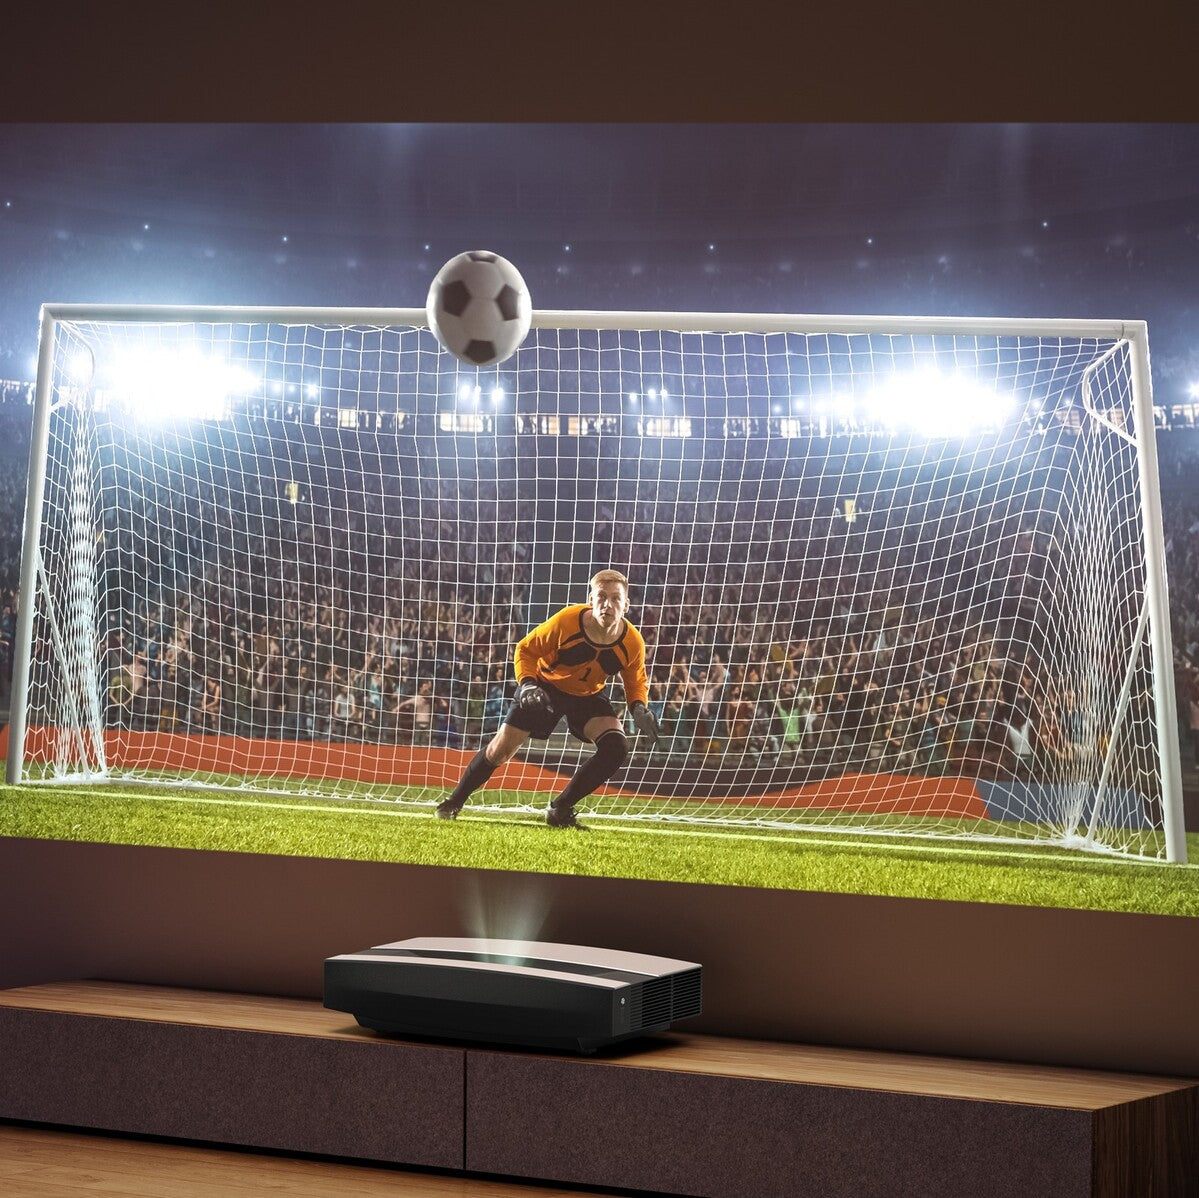 Enjoy Watching the FIFA World Cup With Smart Projectors